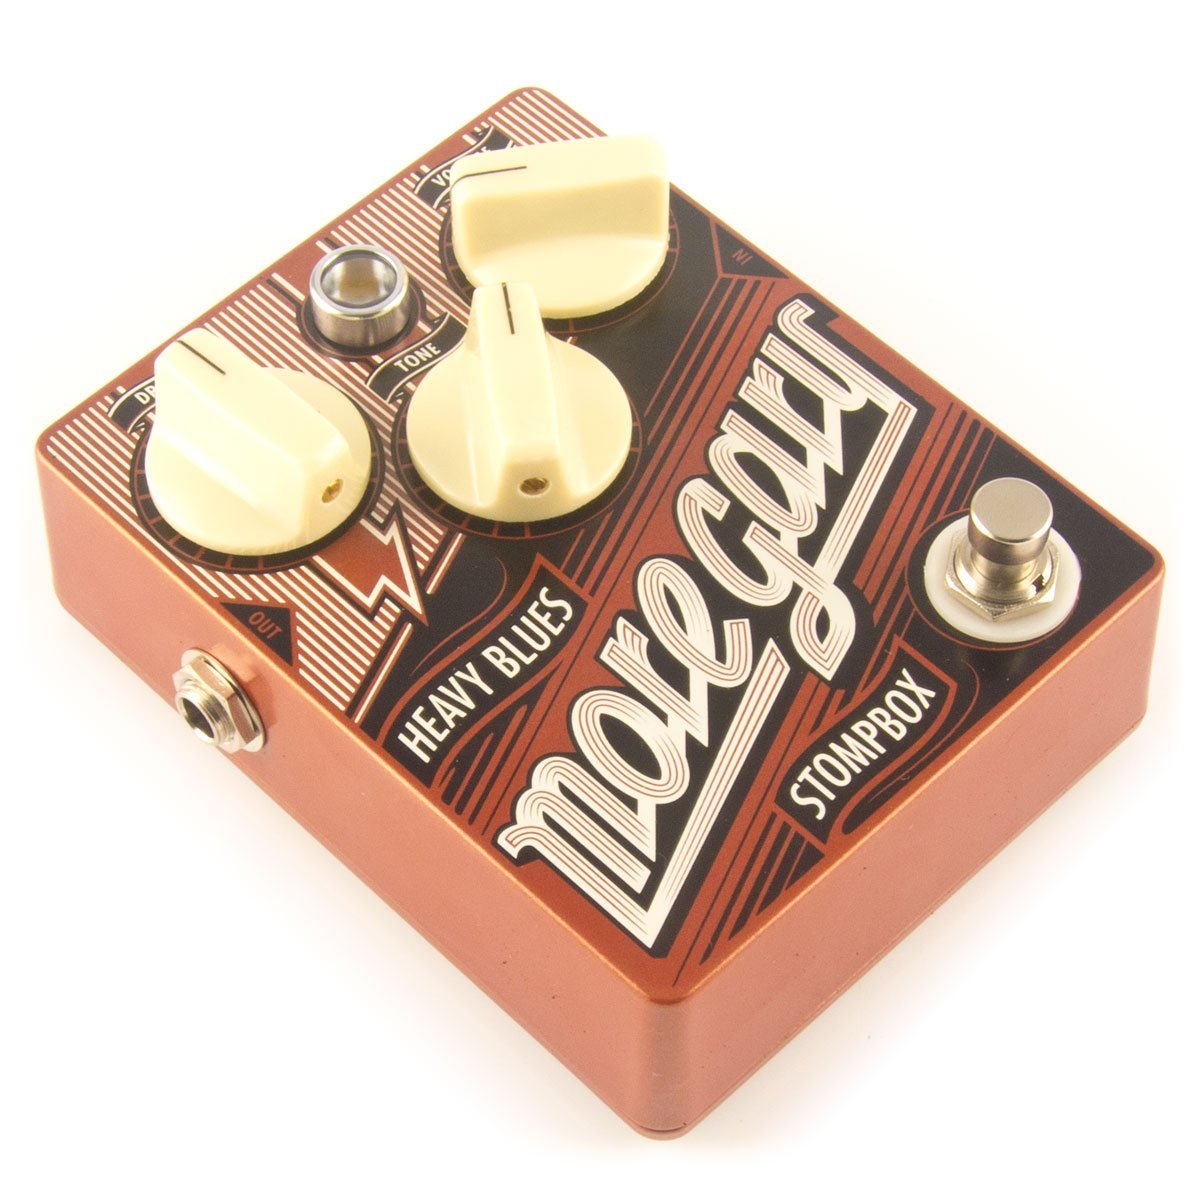 Dr.no Effects More Gary Heavy Blues Overdrive - Overdrive/Distortion/Fuzz Effektpedal - Variation 1